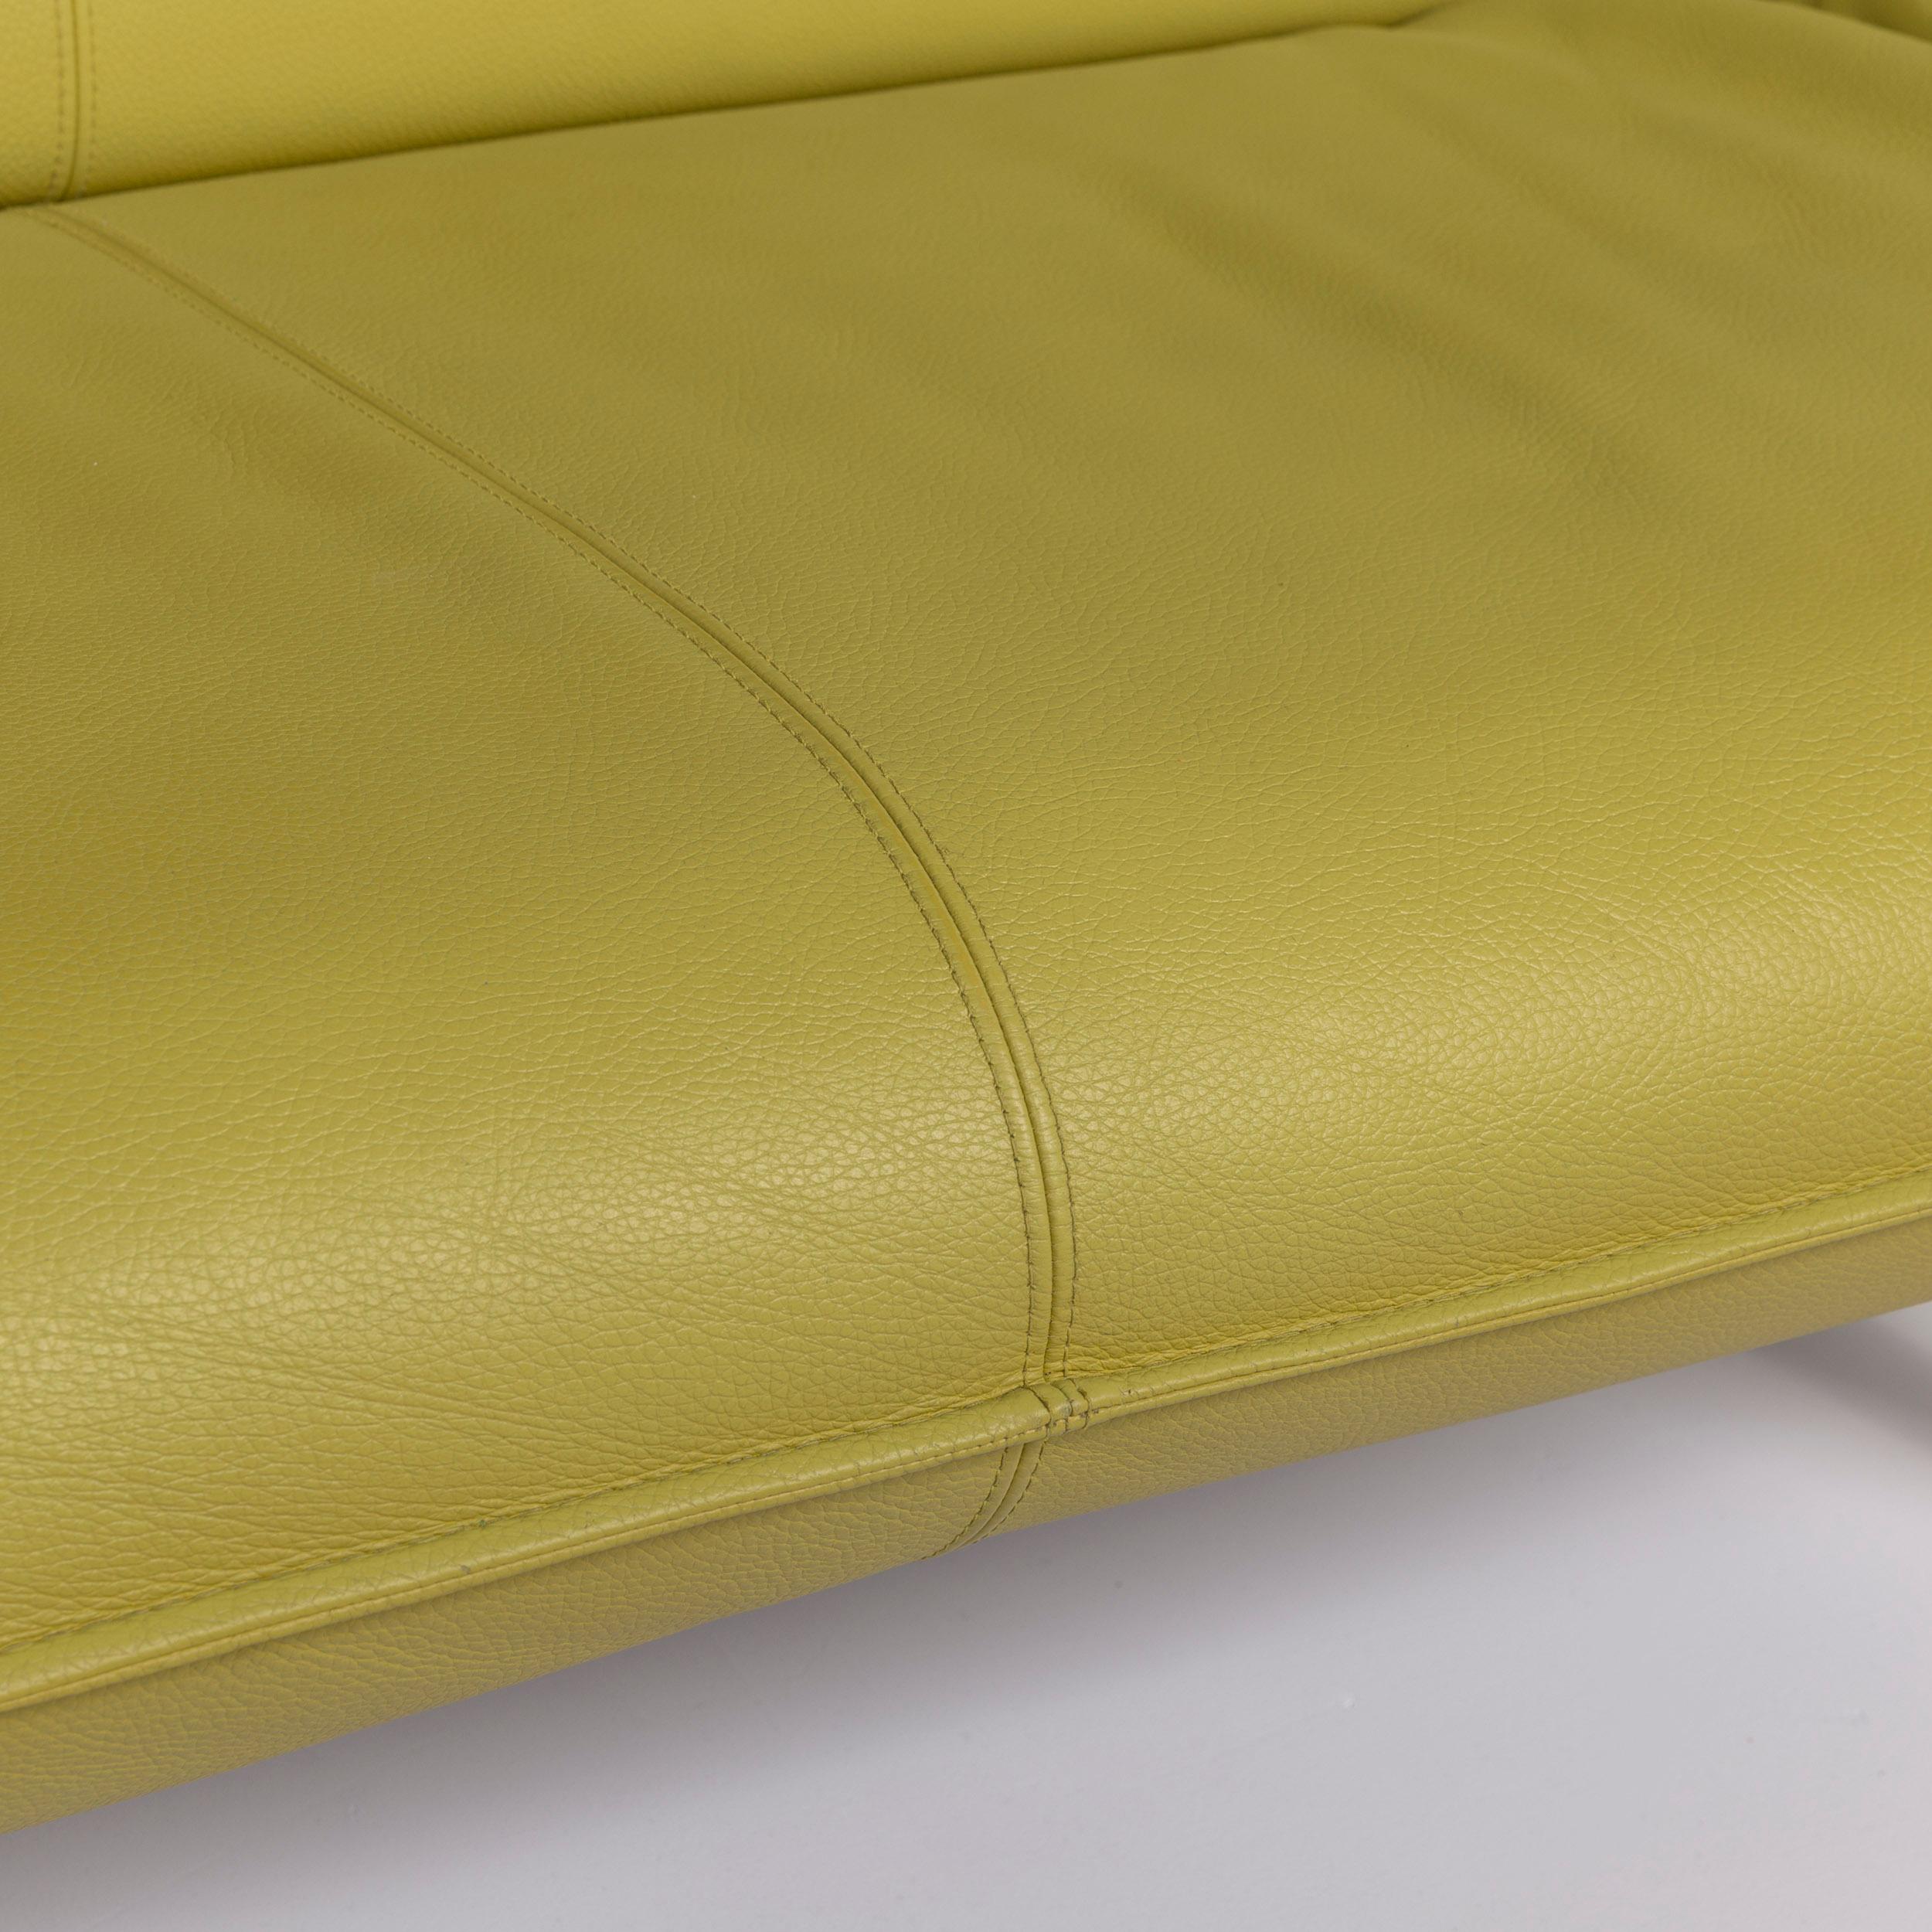 lime green leather sofa